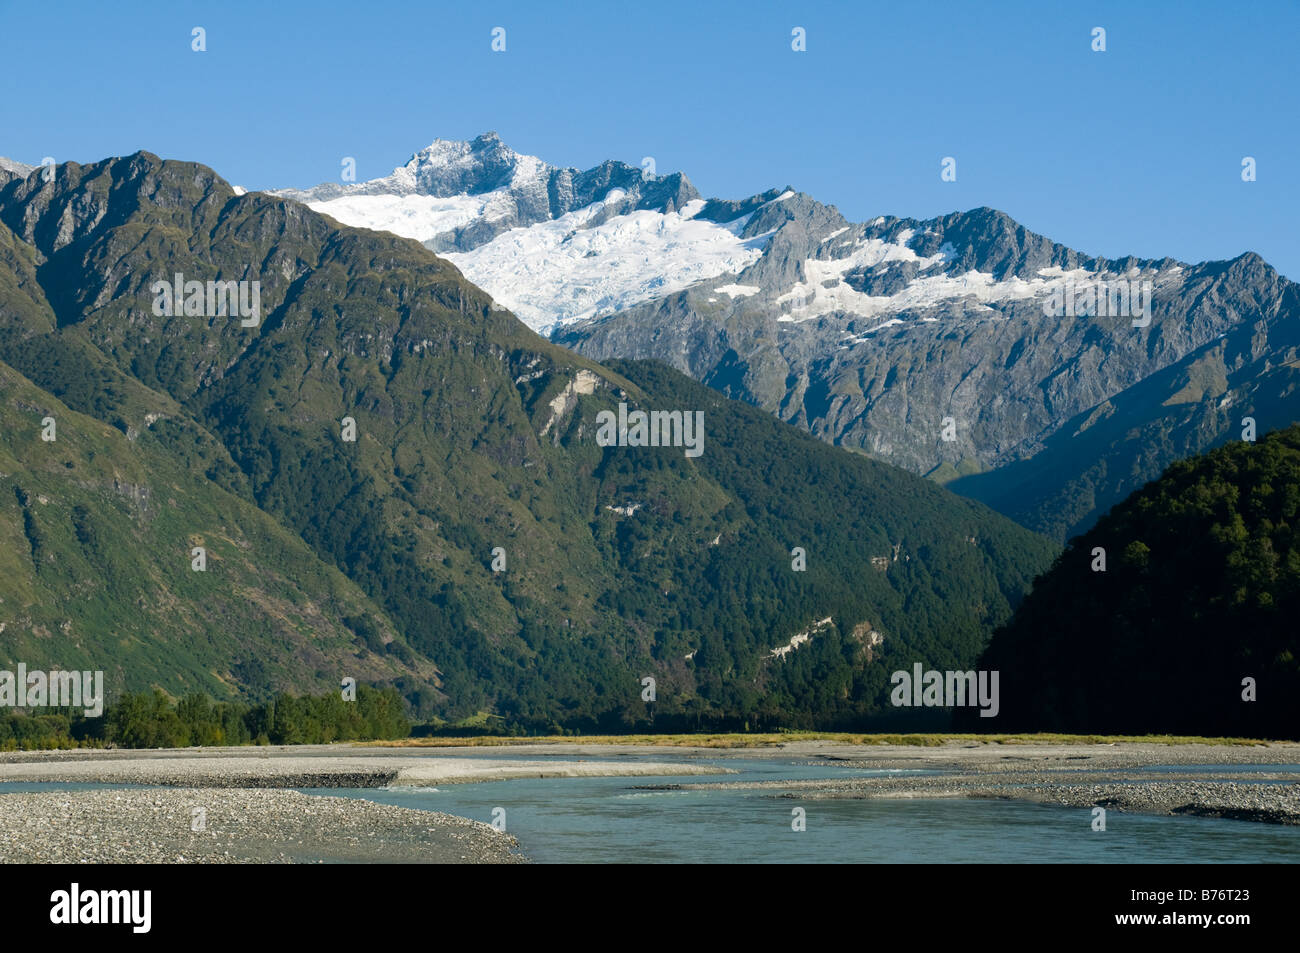 Mount Avalanche and the Avalanche glacier from the Matukituki valley, Mount Aspiring National Park, South Island, New Zealand Stock Photo